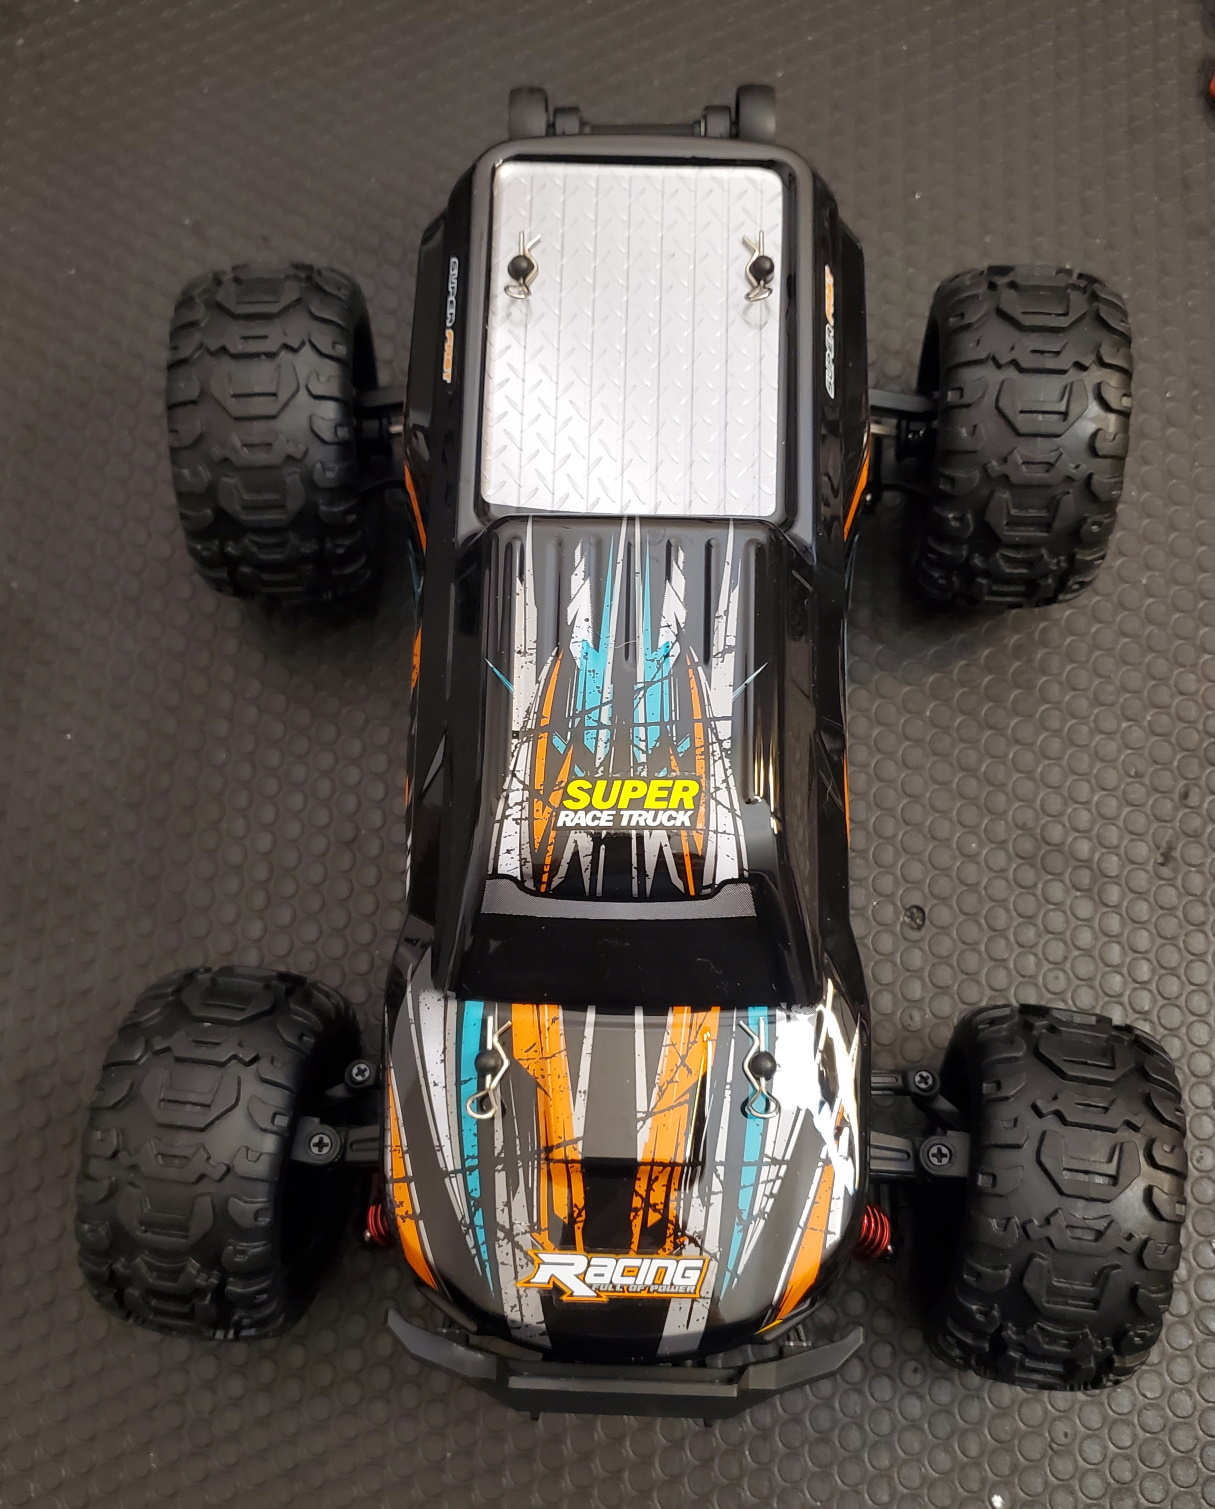 Haiboxing 16890 1/16th Brushed Rc Monster Truck All-Terrain